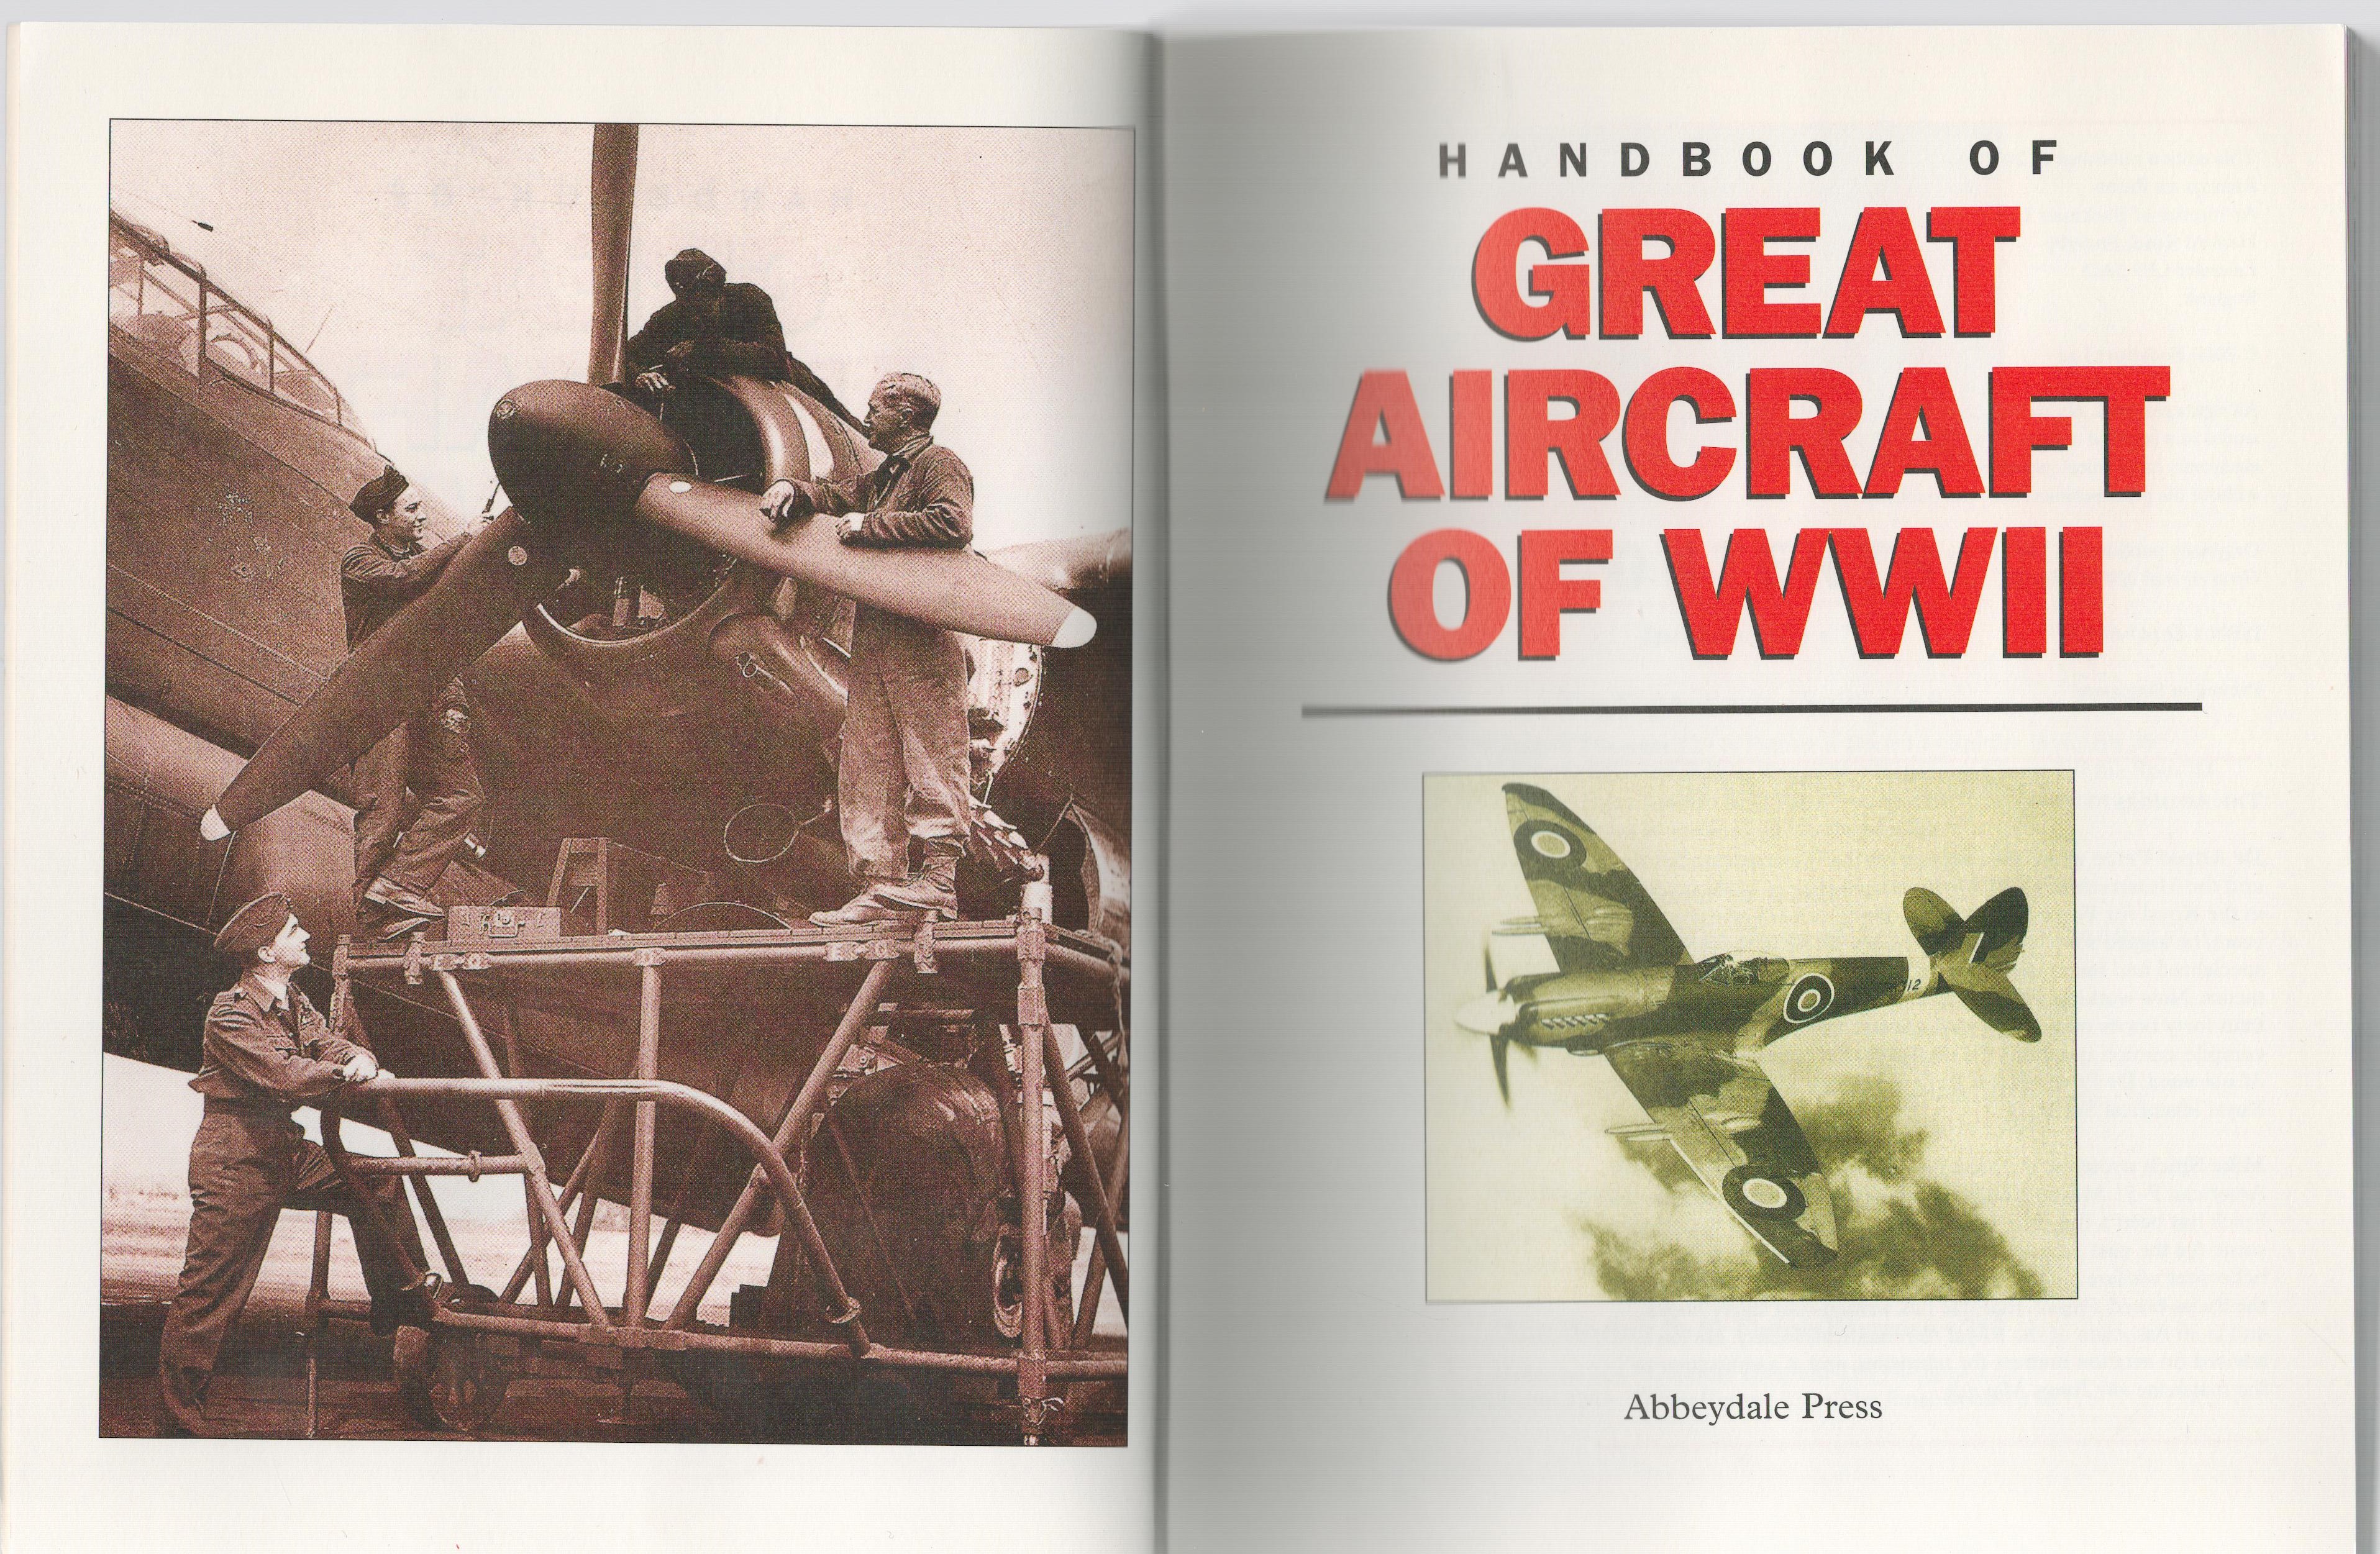 Handbook of Great Aircraft of WWII 1st Edition Paperback Book By Dr Alfred Price. Published in 2000. - Image 2 of 3